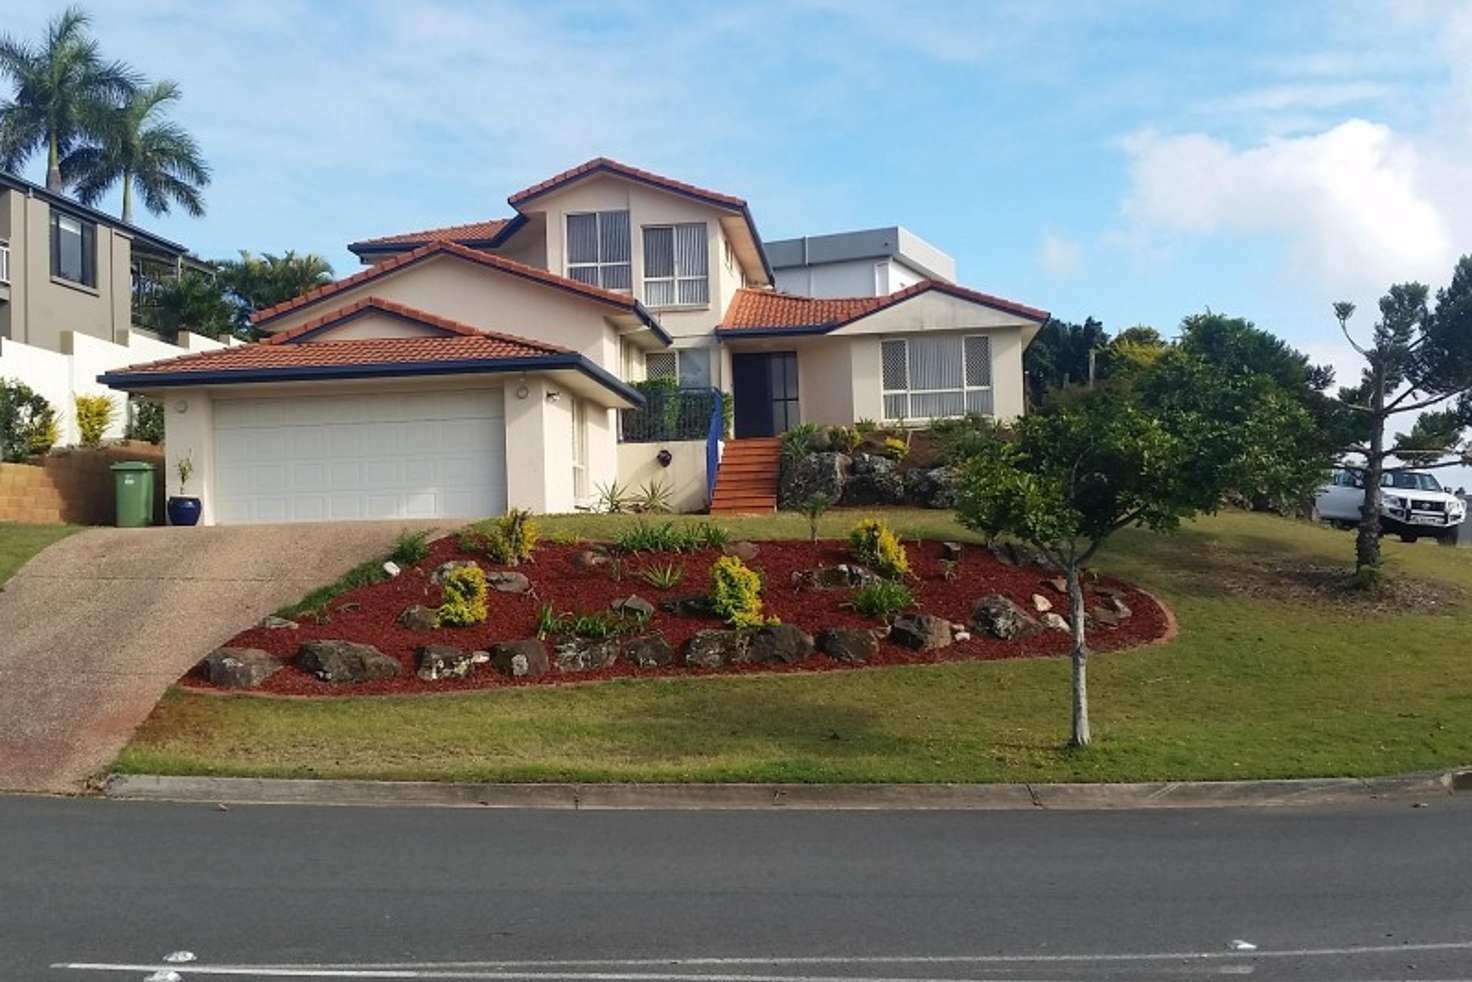 Main view of Homely house listing, 31 Arun dr, Arundel QLD 4214